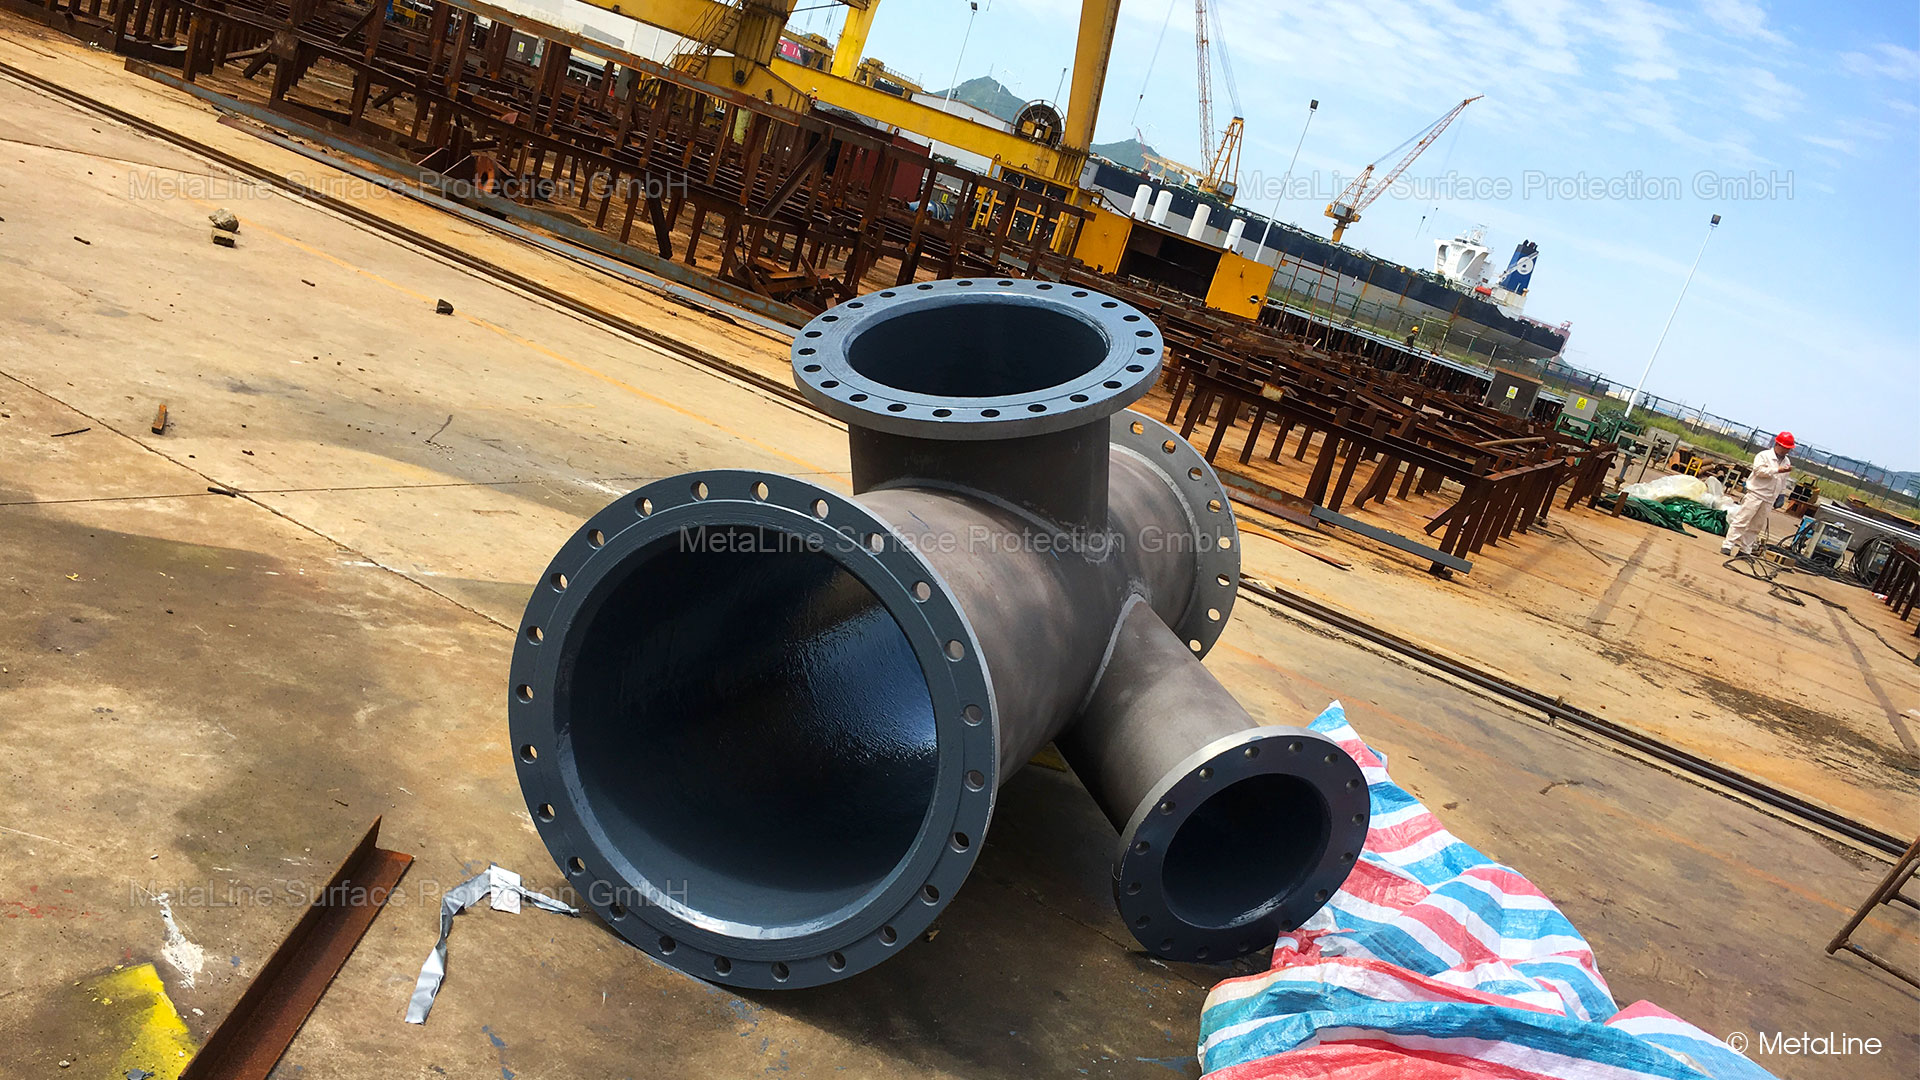 <!-- START: ConditionalContent --> Scrubber pipe, sulphuric acid, waste incineration, washing tower, acid formation, chemical protection, corrosion protection, steel, coating, coating, brushing, spraying, rolling <!-- END: ConditionalContent -->   <!-- START: ConditionalContent --><!-- END: ConditionalContent -->   <!-- START: ConditionalContent --><!-- END: ConditionalContent --> <!-- START: ConditionalContent --><!-- END: ConditionalContent --> 